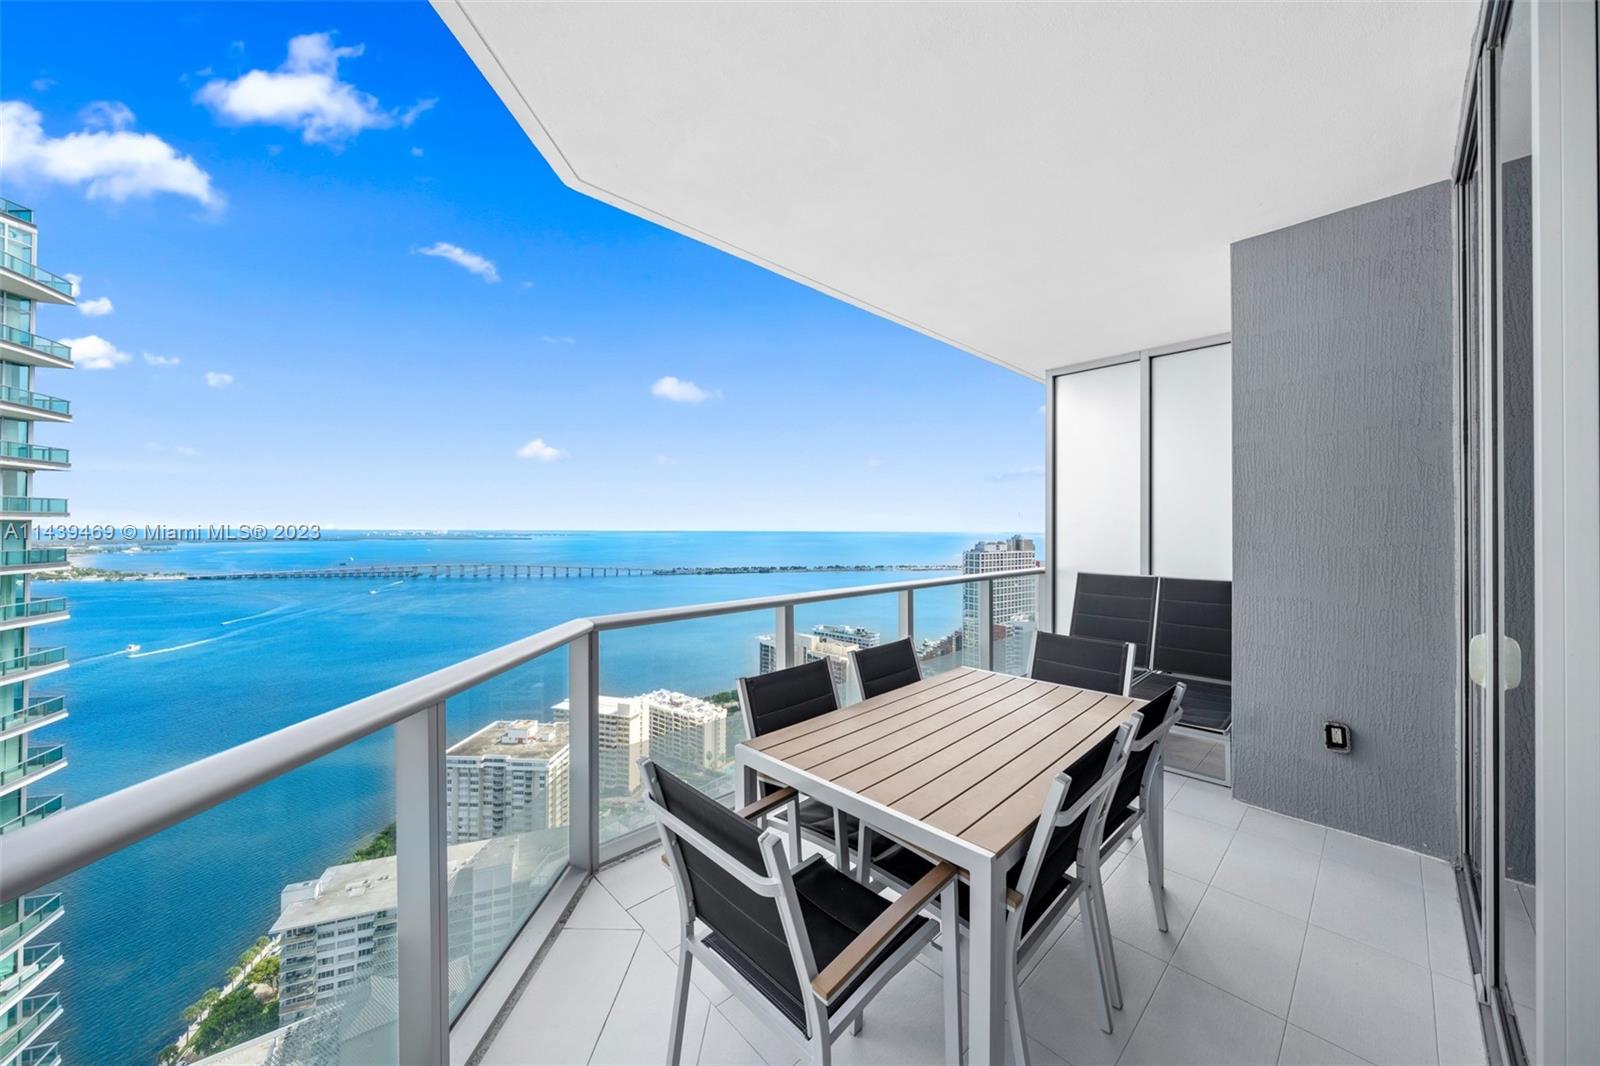 A spectacular corner unit in this much sought after  building in the heart of Brickell by the Bay. This fantastic unit boast 2 balconies with breathtaking bay views as well as the city. Upgrades include electric blinds in the main room, custom light fixtures, state of the art smart toilets and a Sonos Sound System. Building comes with superb amenities including 2 pools, hot tub, fitness center with spa, theater room, two lounges, kids room and 24hr concierge, valet and security.